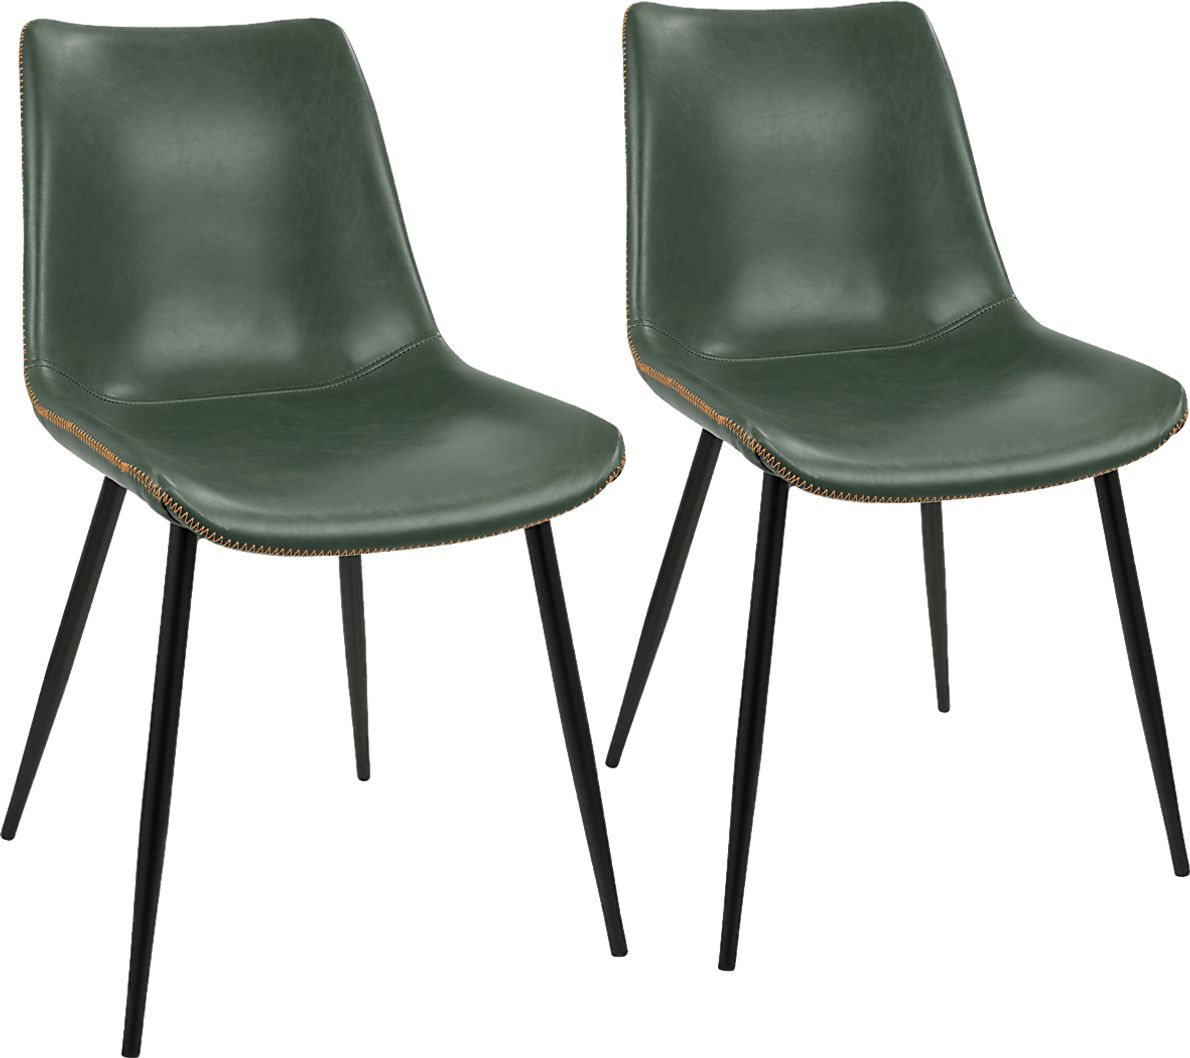 Tobin Green Dining Chair (Set of 2)